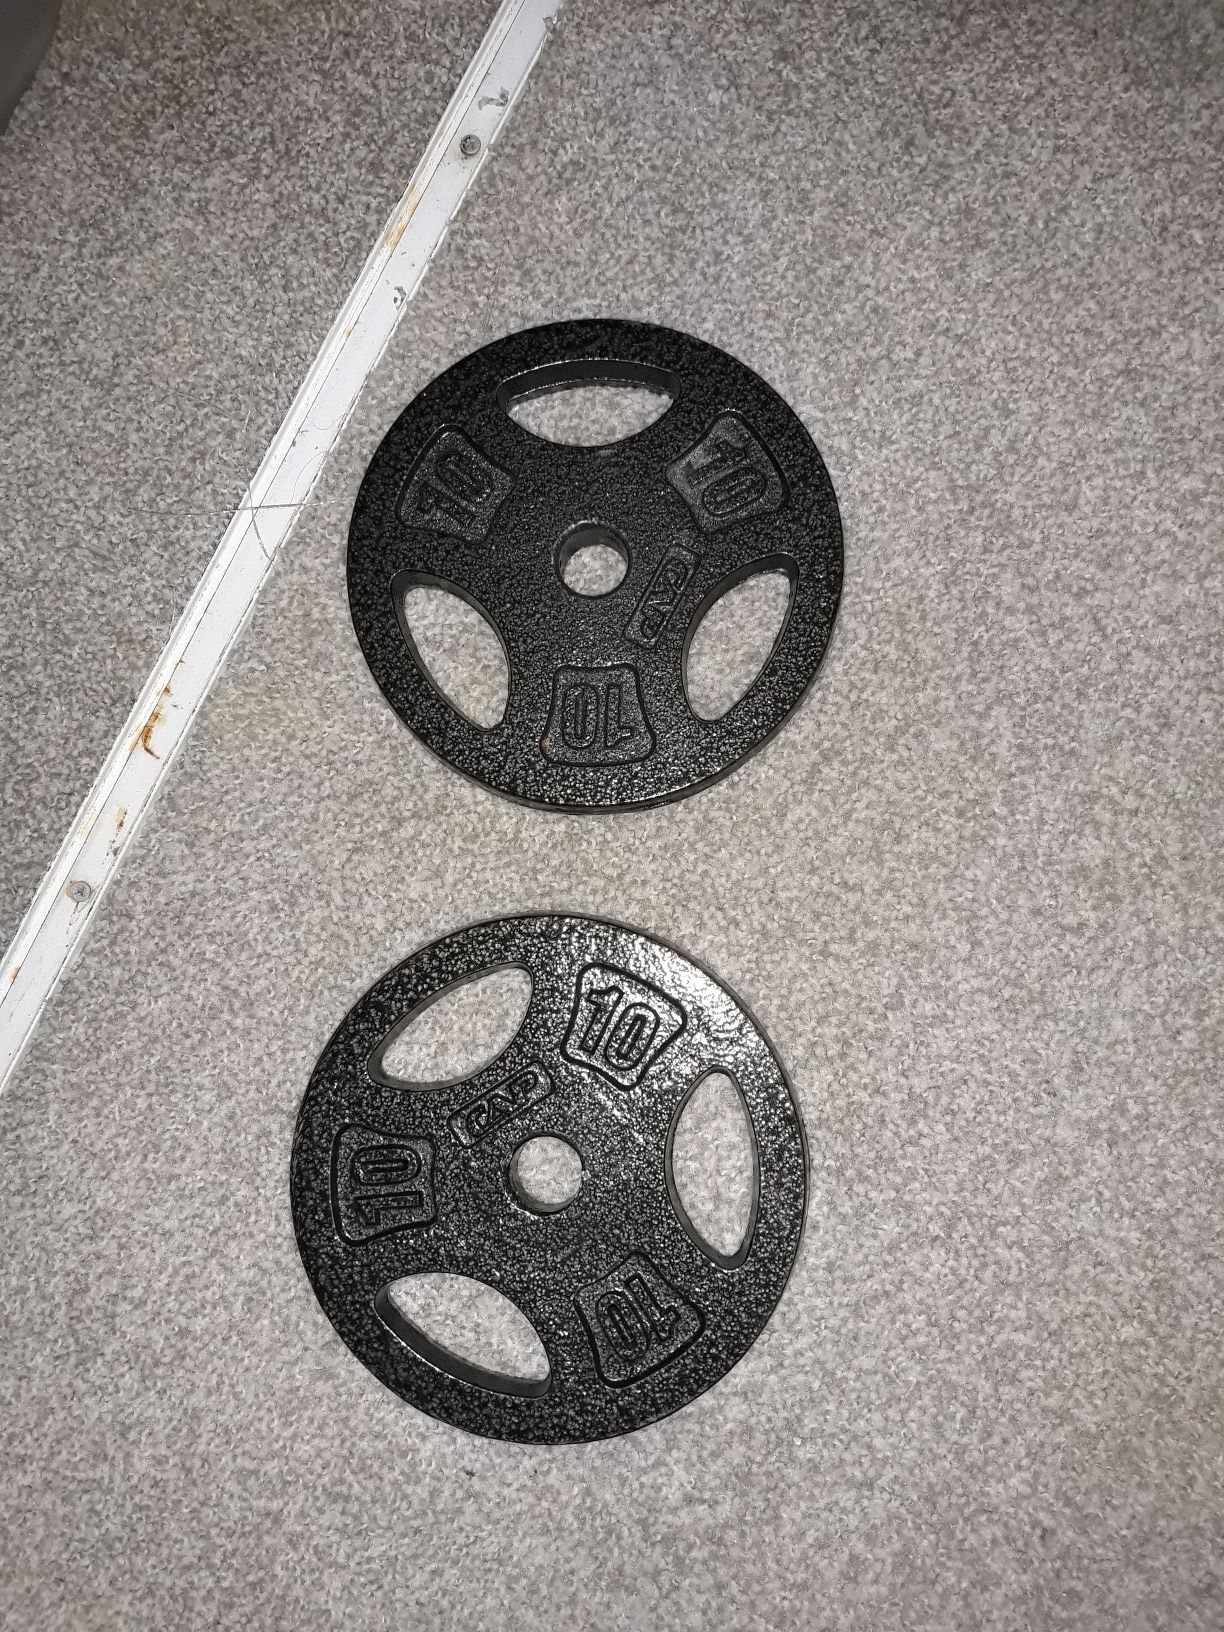 Set of 10 lbs circle weights for barbell